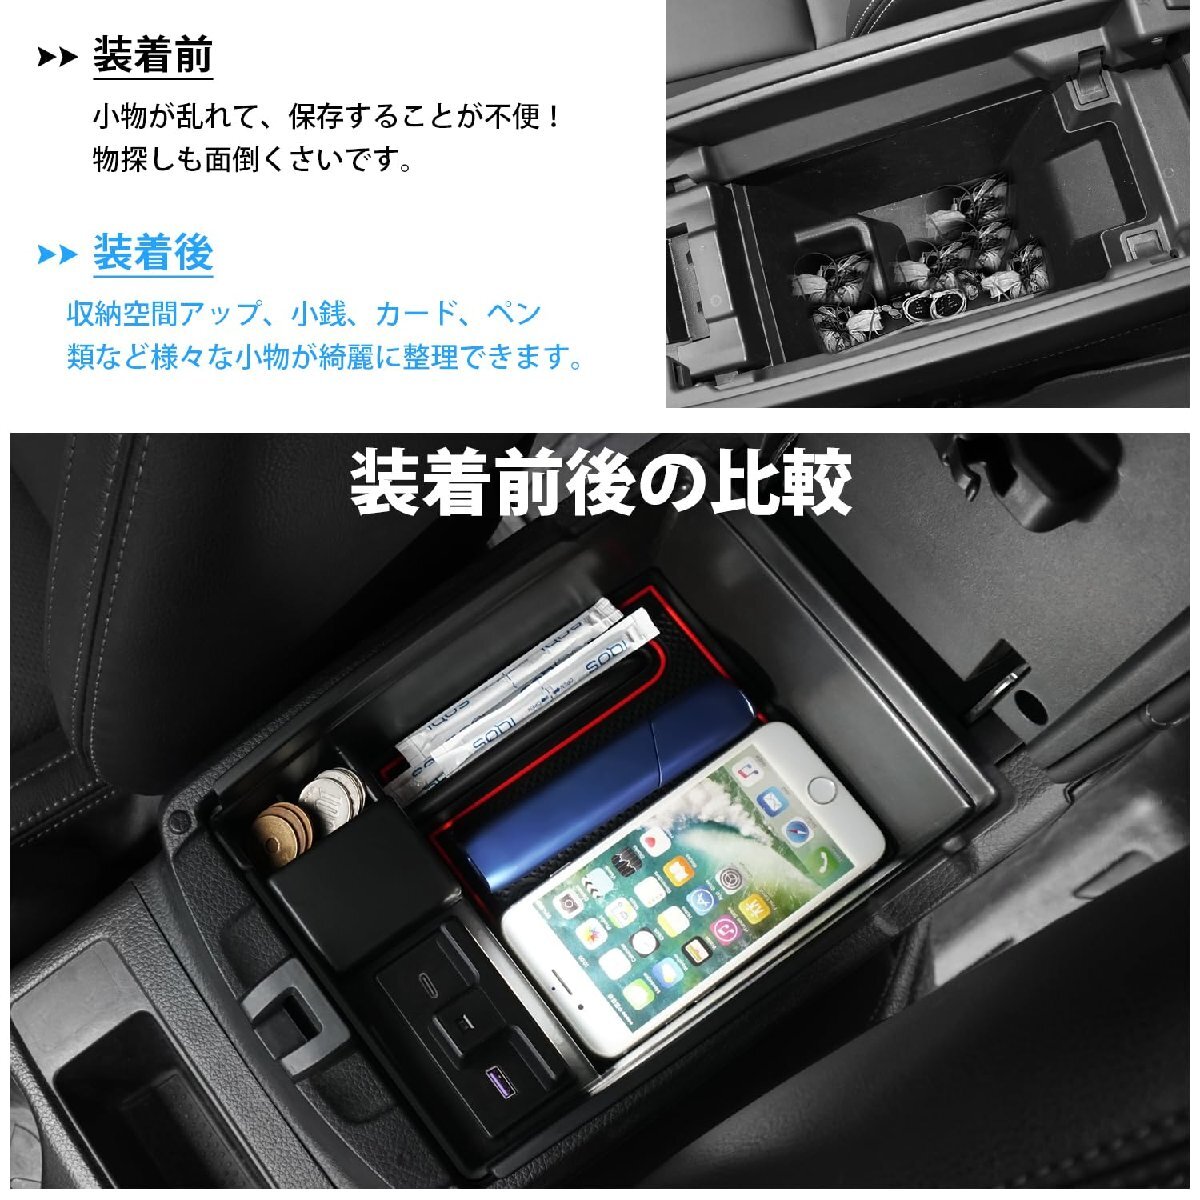 Auto Spec Nissan X-trail T32 rom and rear (before and after) period agreement built-in type console box storage in car box 2 port USB charge attaching car make special design 